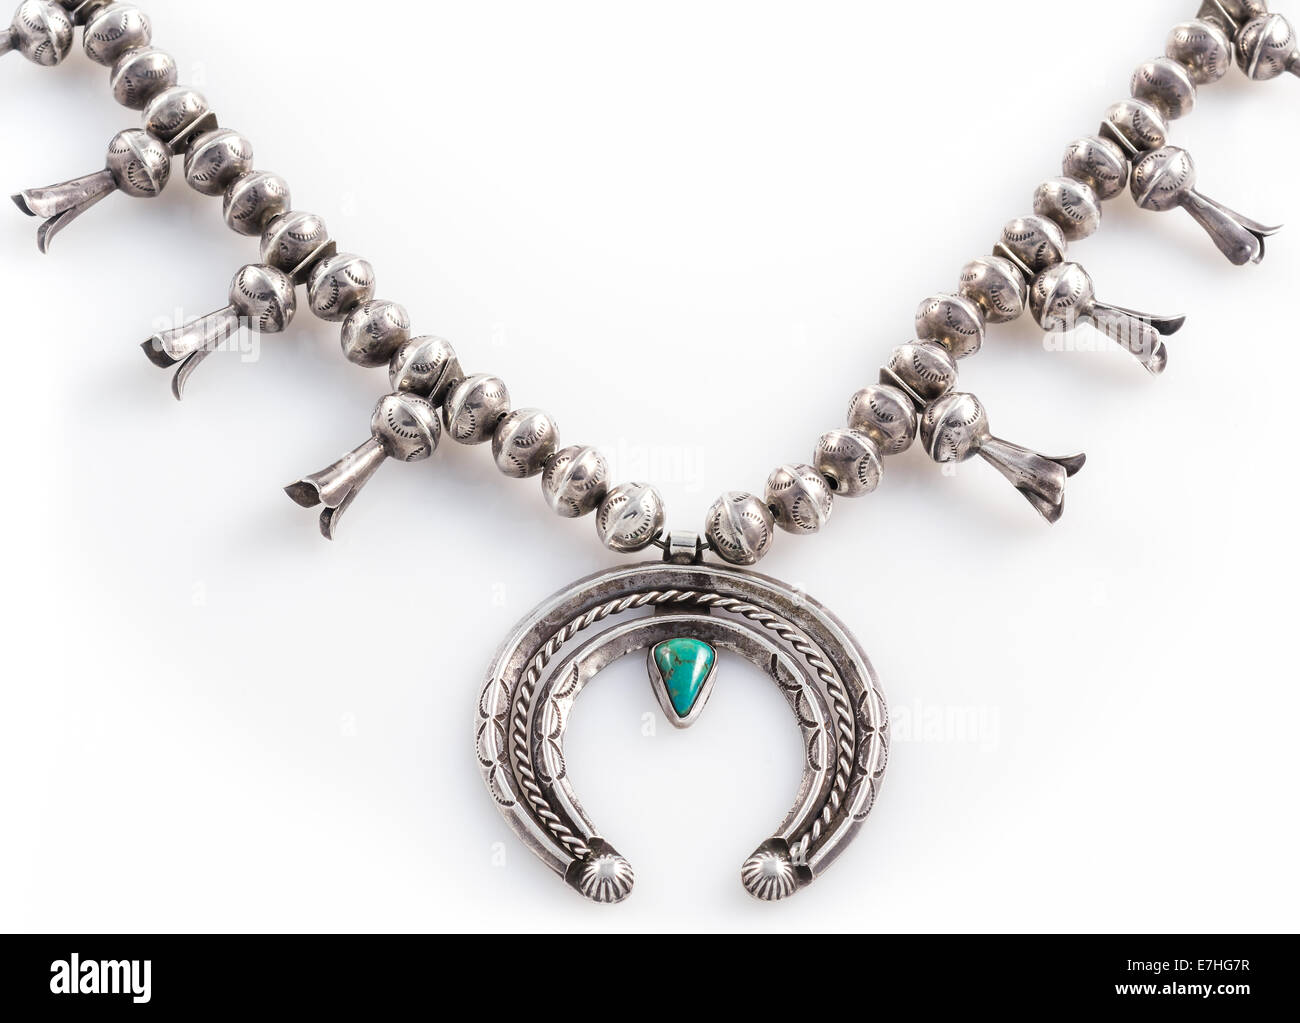 Silver and Turquoise Squash Blossom Necklace. Stock Photo